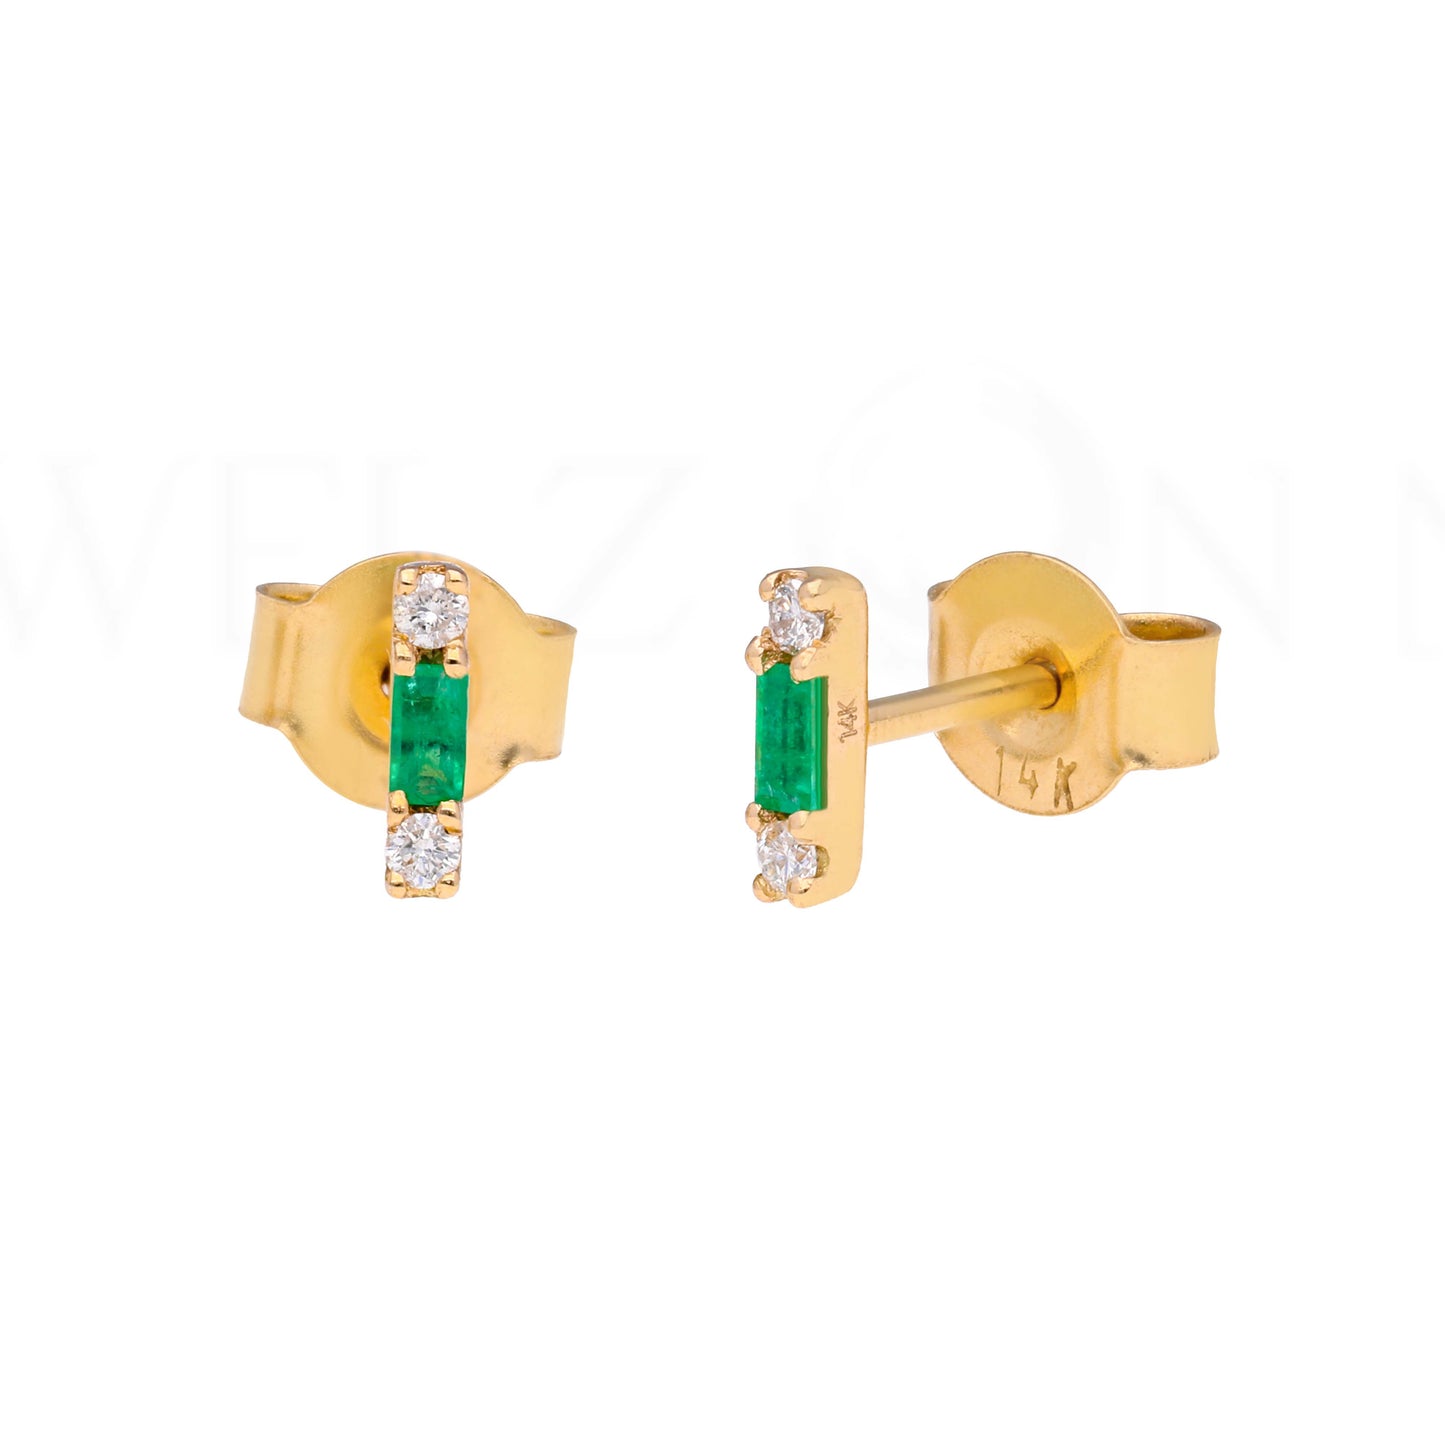 0.12 Ct. Baguette Diamond VS Clarity F Color Stud Earrings Solid 14k Yellow Gold